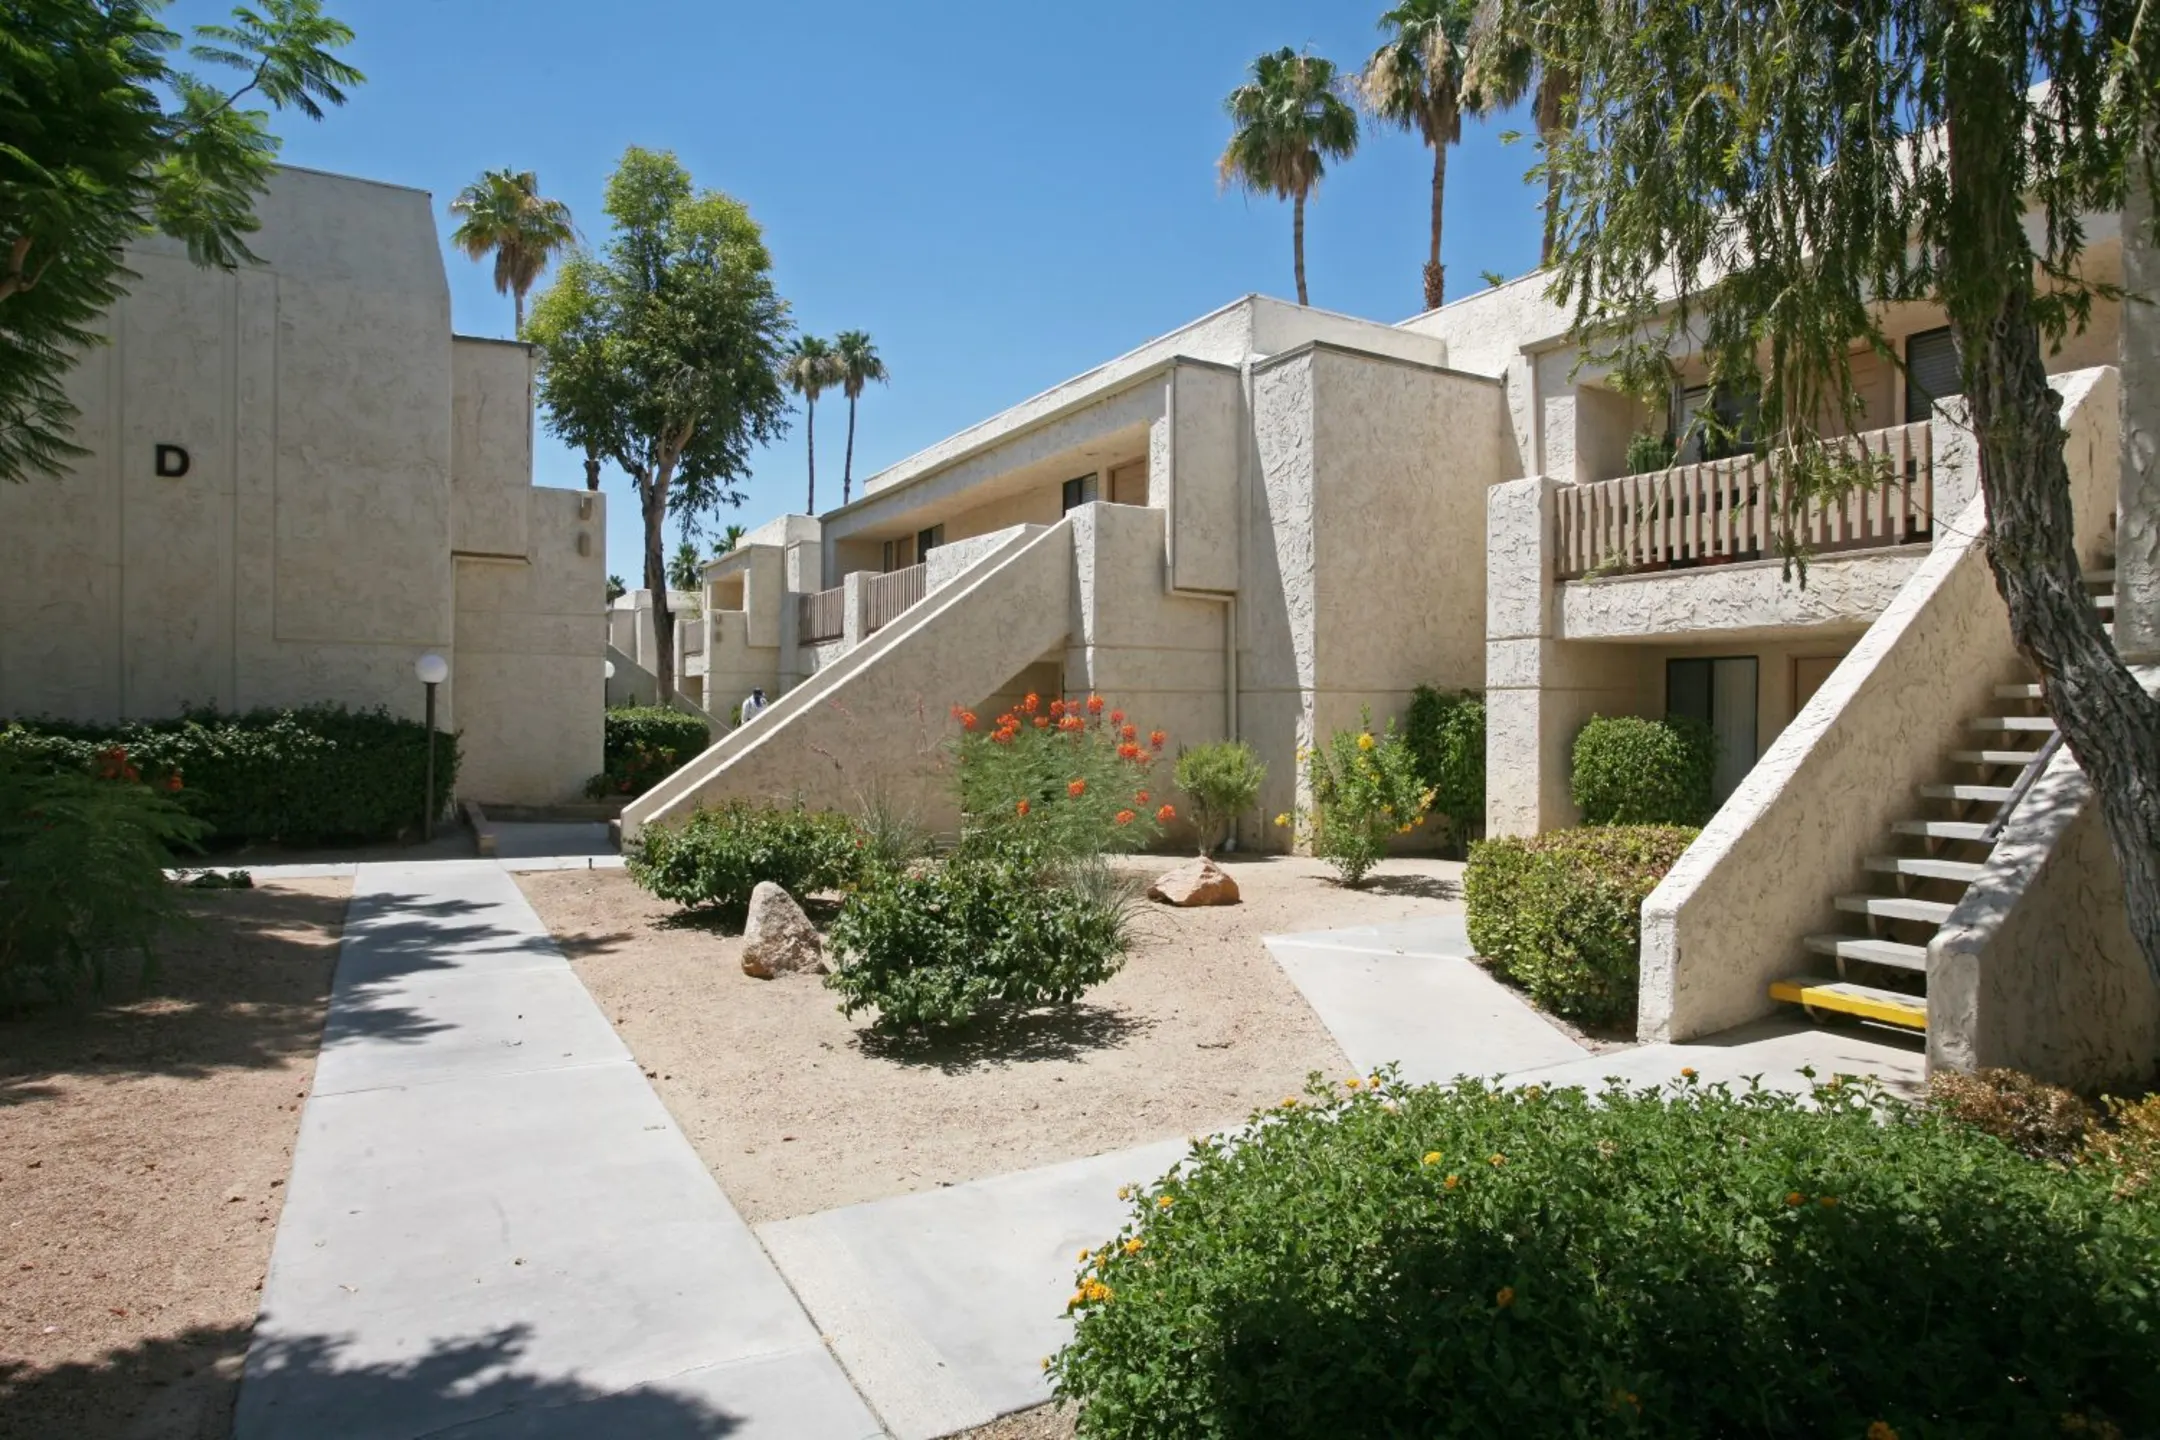 Building - Palm Canyon Terrace - Palm Springs, CA